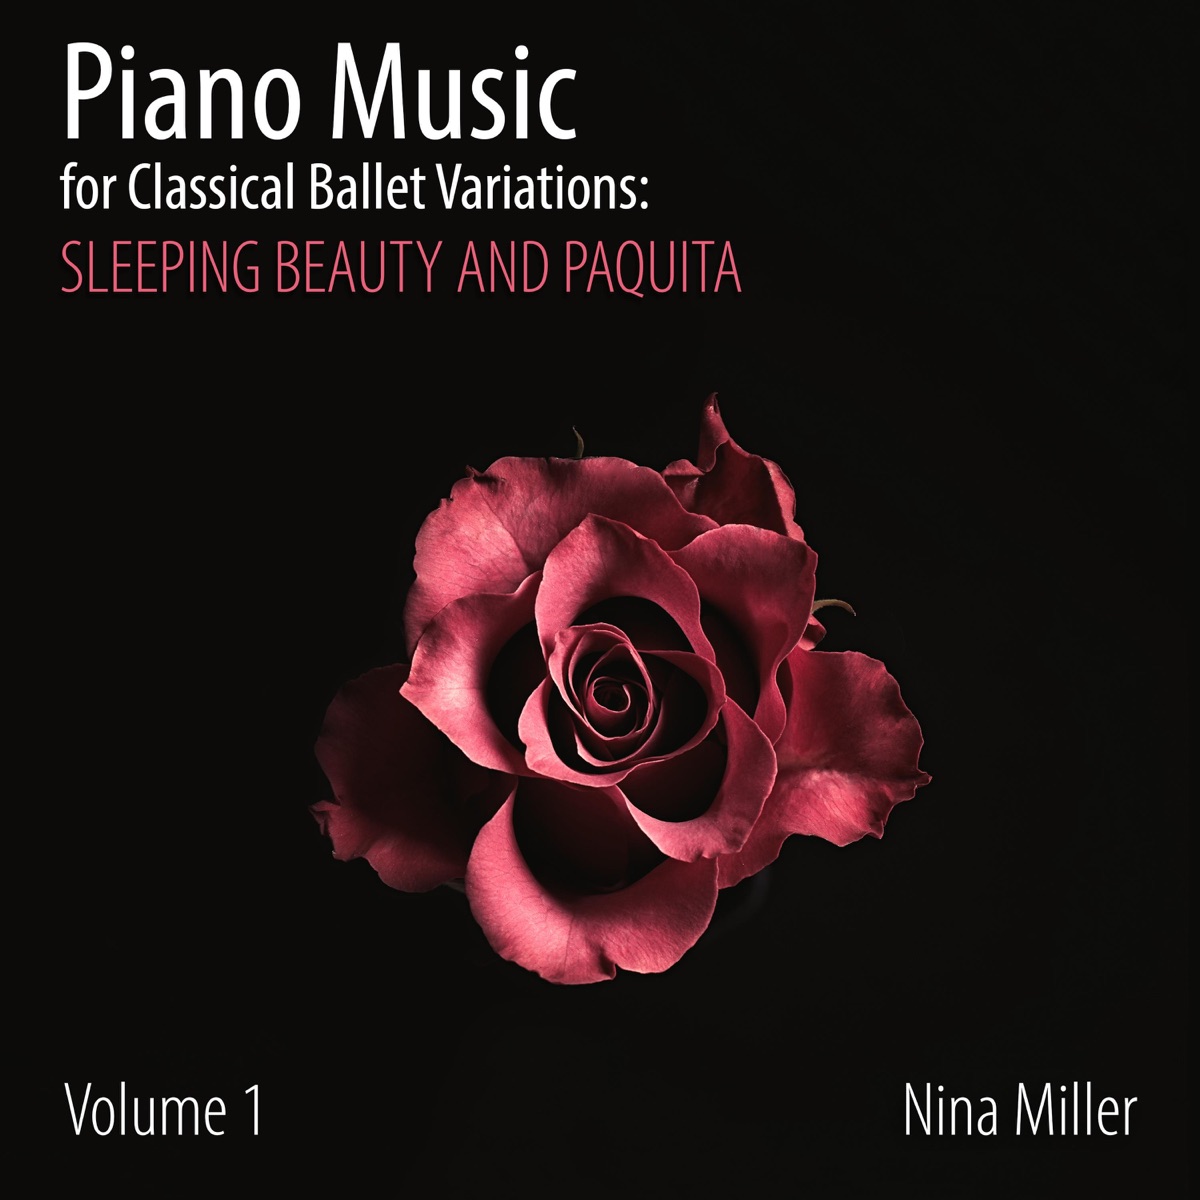 Piano Music for Classical Ballet Variations: Sleeping Beauty and Paquita by  Nina Miller on Apple Music